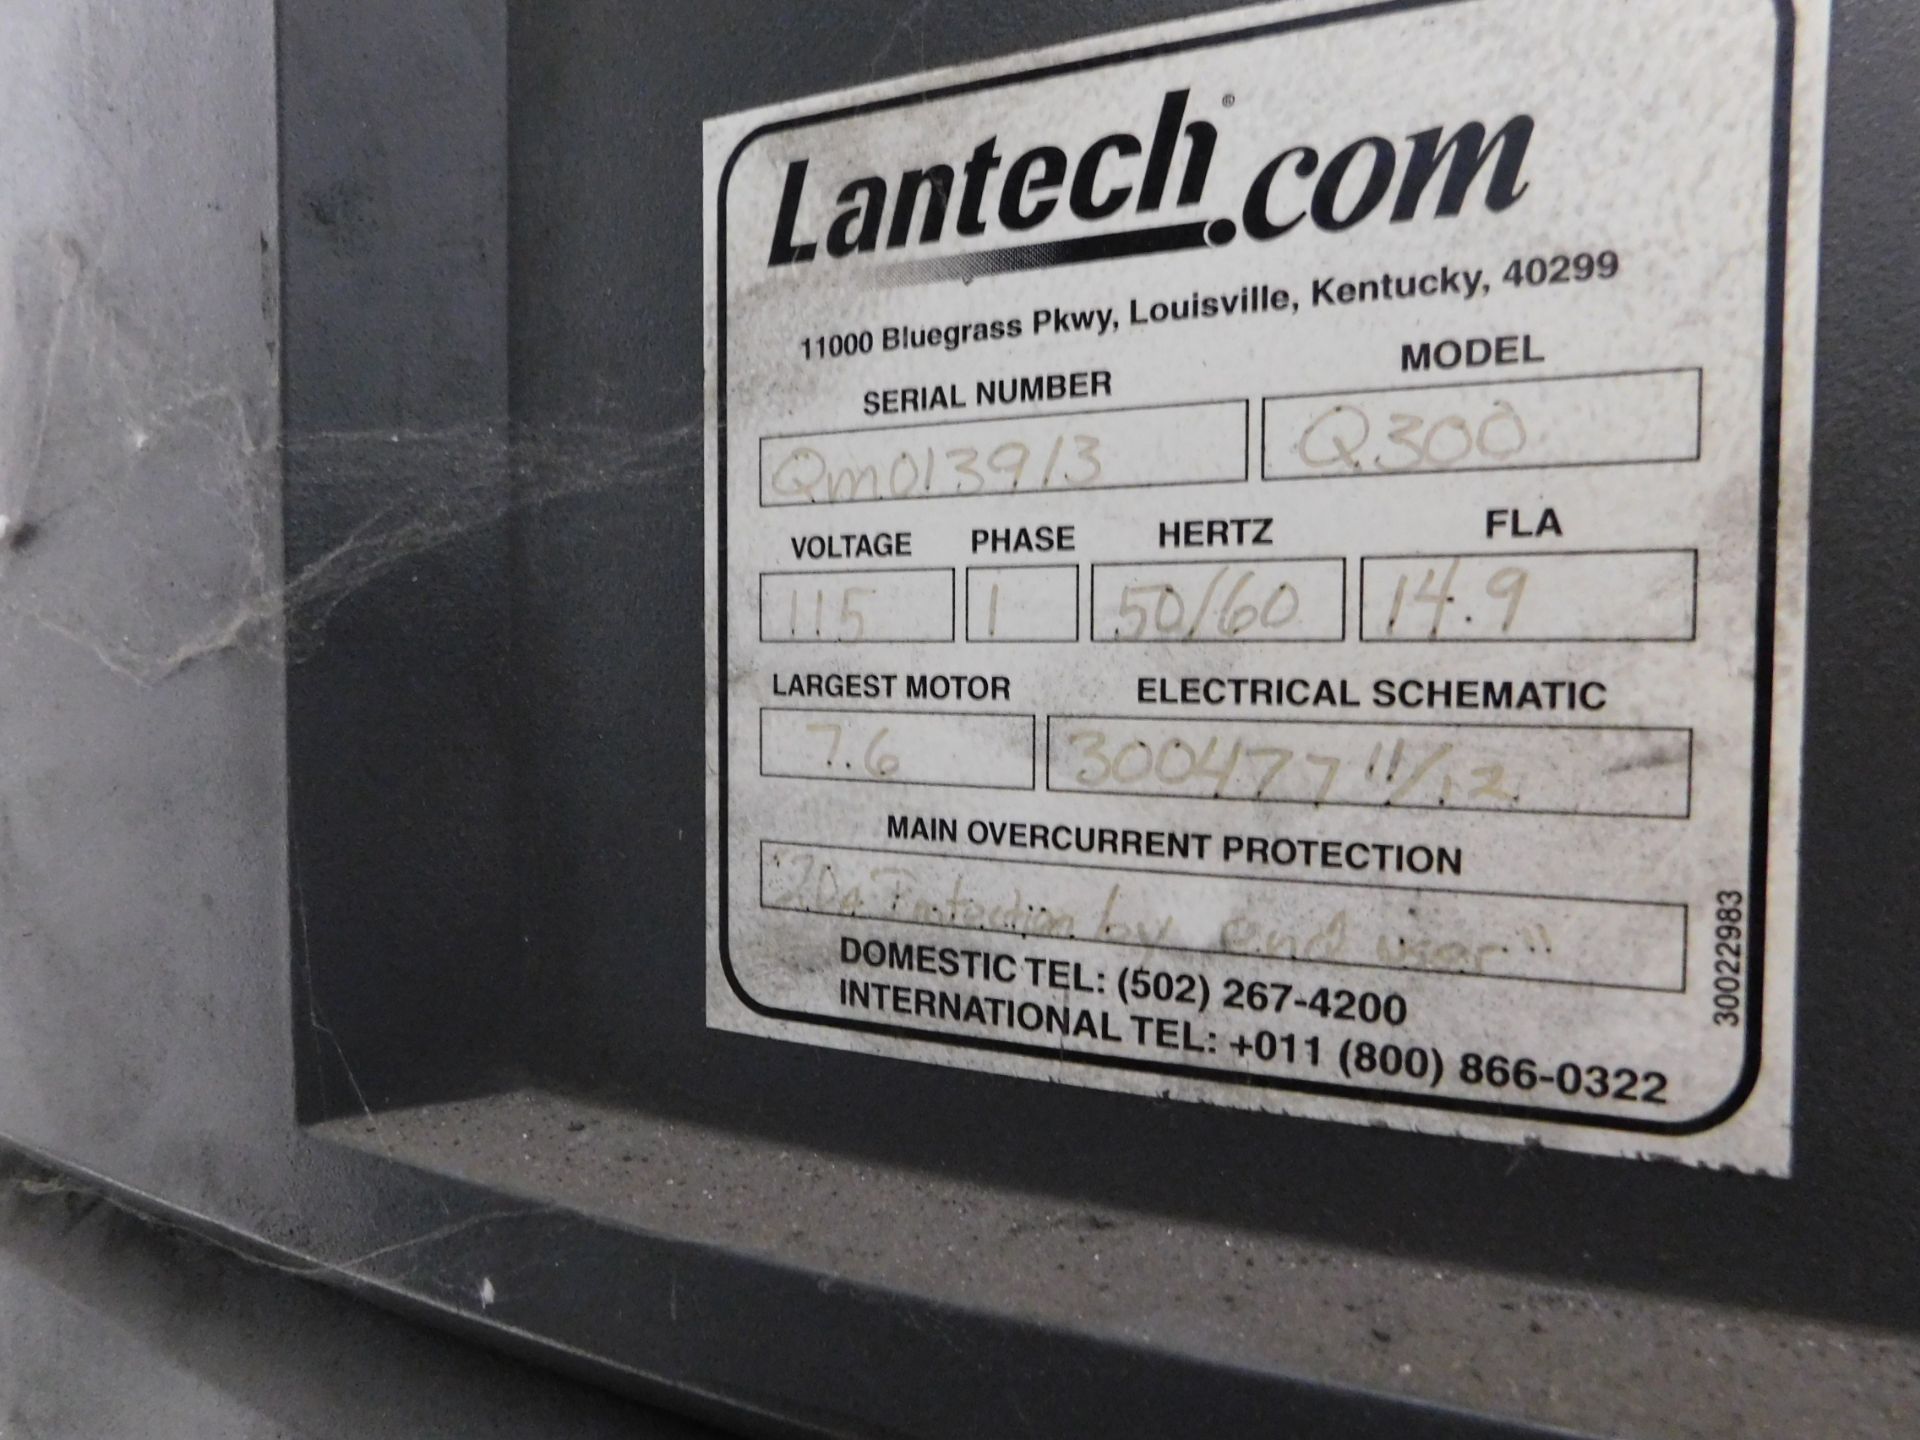 Lantech Model Q300 Pallet Wrapper, s/n QM013913, Comes with 8+ Rolls of Wrap, Location 1 - 1100 - Image 2 of 7